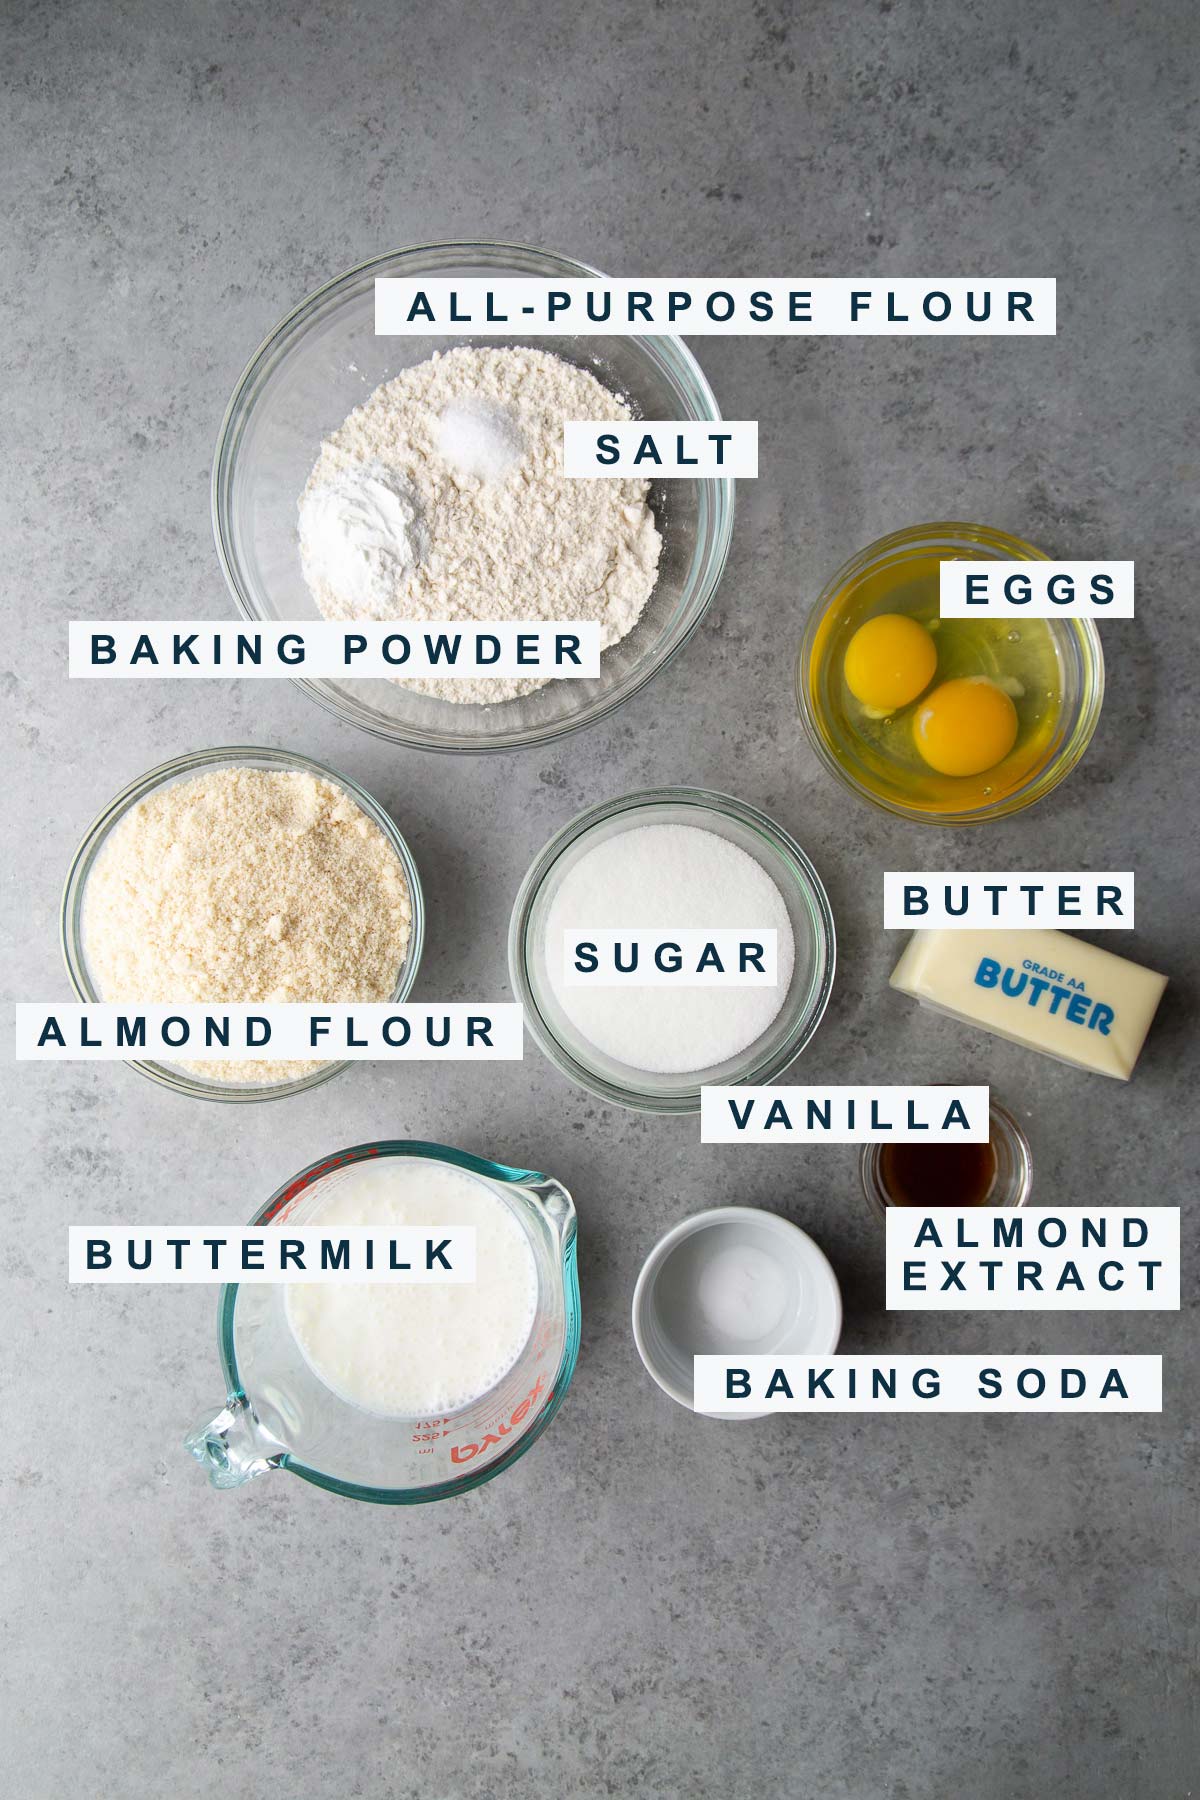 almond cake ingredients include flour, almond flour, eggs, butter, and buttermilk.